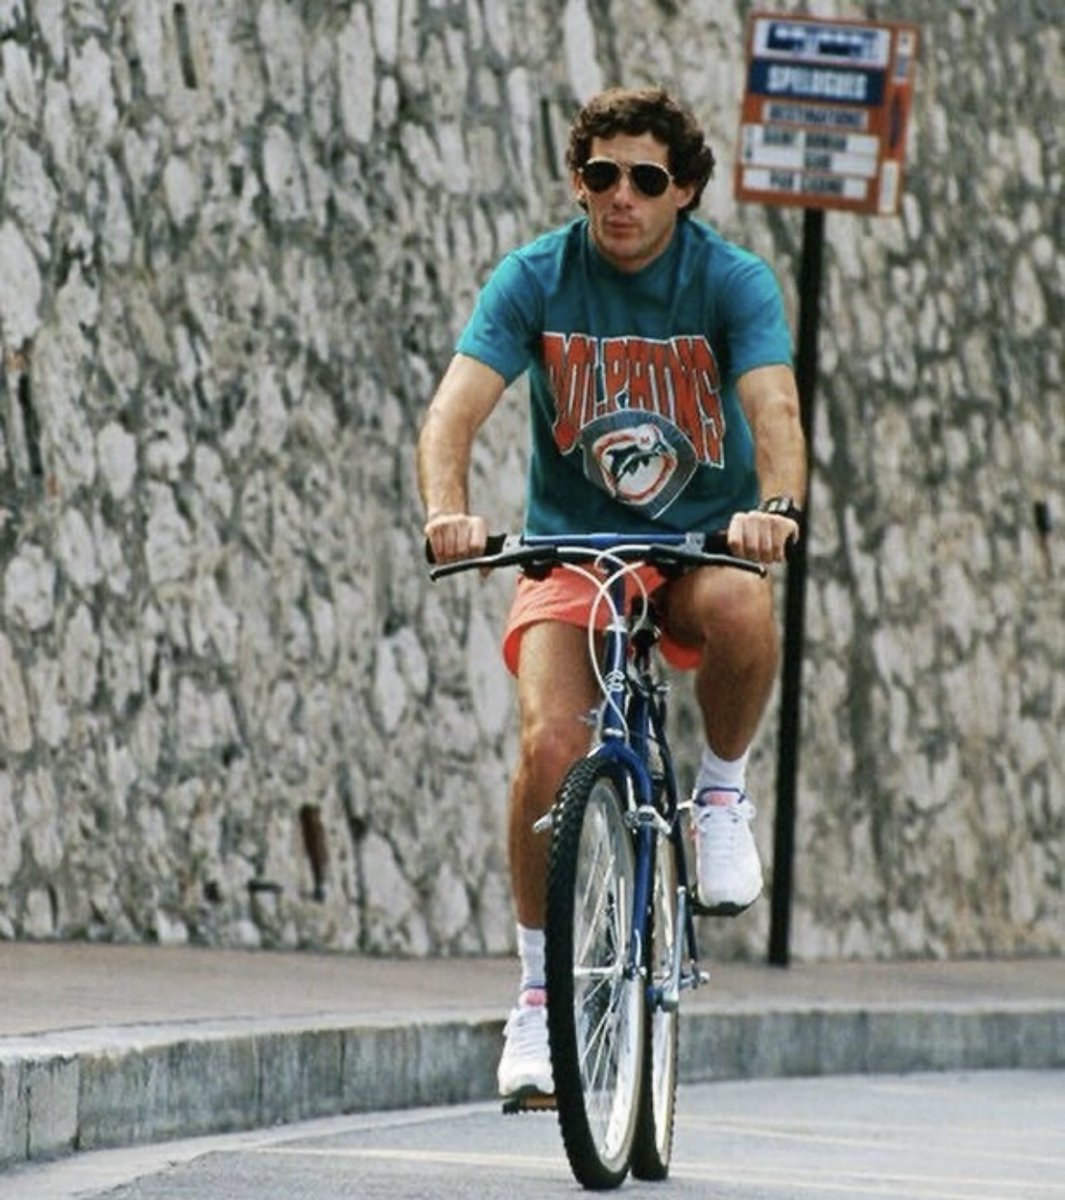 Ayrton Senna riding the streets of Monaco over the 1991 GP weekend wearing a Miami Dolphins t-shirt by Starter and original Nike Air Max 180 Ultramarine sneakers. #MiamiGP